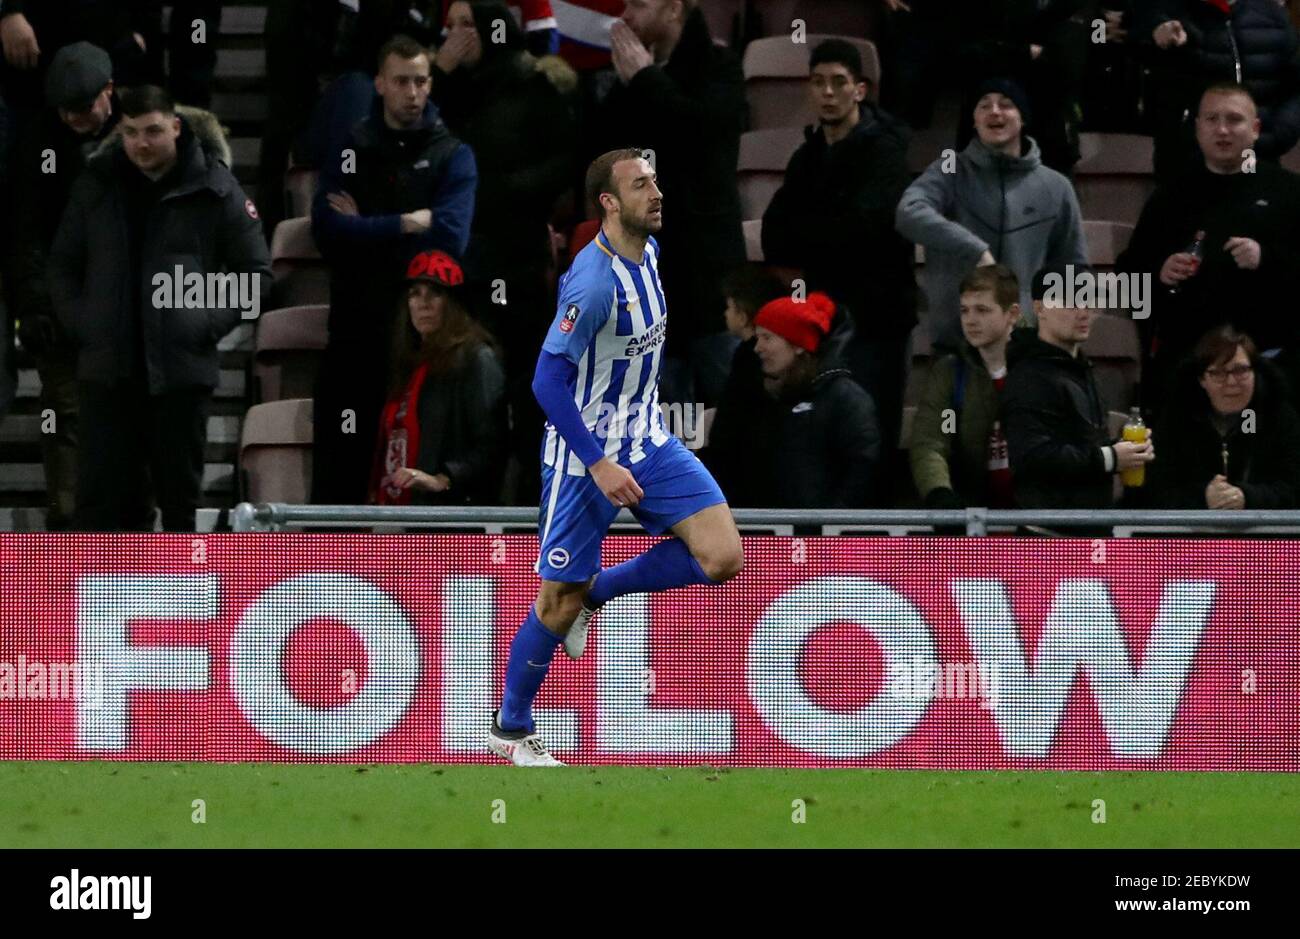 Soccer Football - FA Cup Fourth Round - Middlesbrough vs Brighton & Hove Albion - Riverside Stadium, Middlesbrough, Britain - January 27, 2018   Brighton's Glenn Murray celebrates scoring their first goal   REUTERS/Scott Heppell Stock Photo